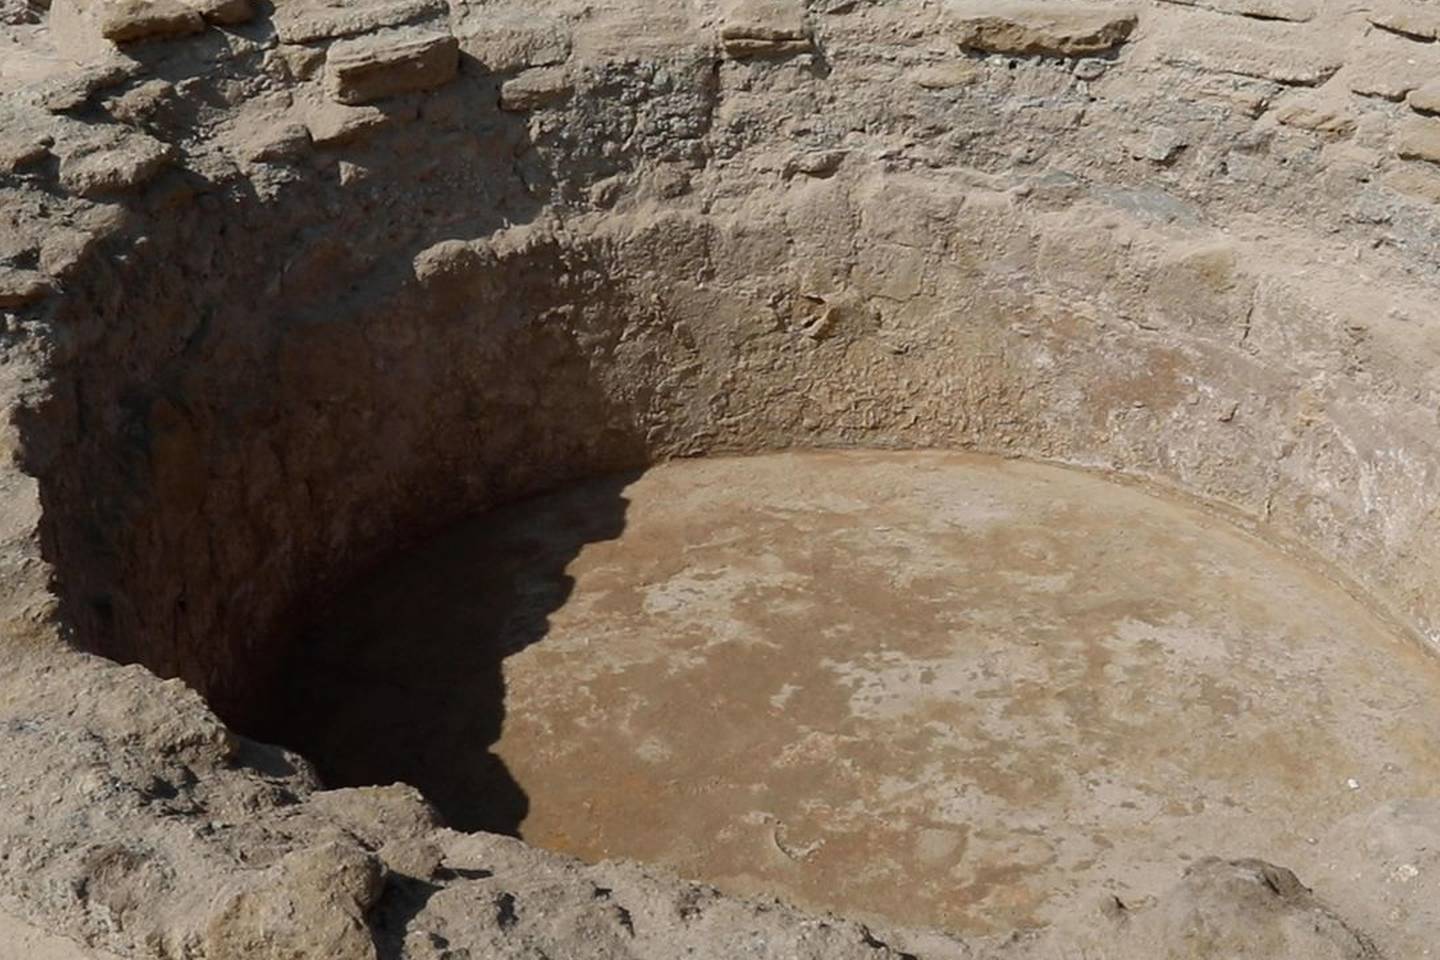 Ancient Christian monastery discovered in Umm Al Quwain